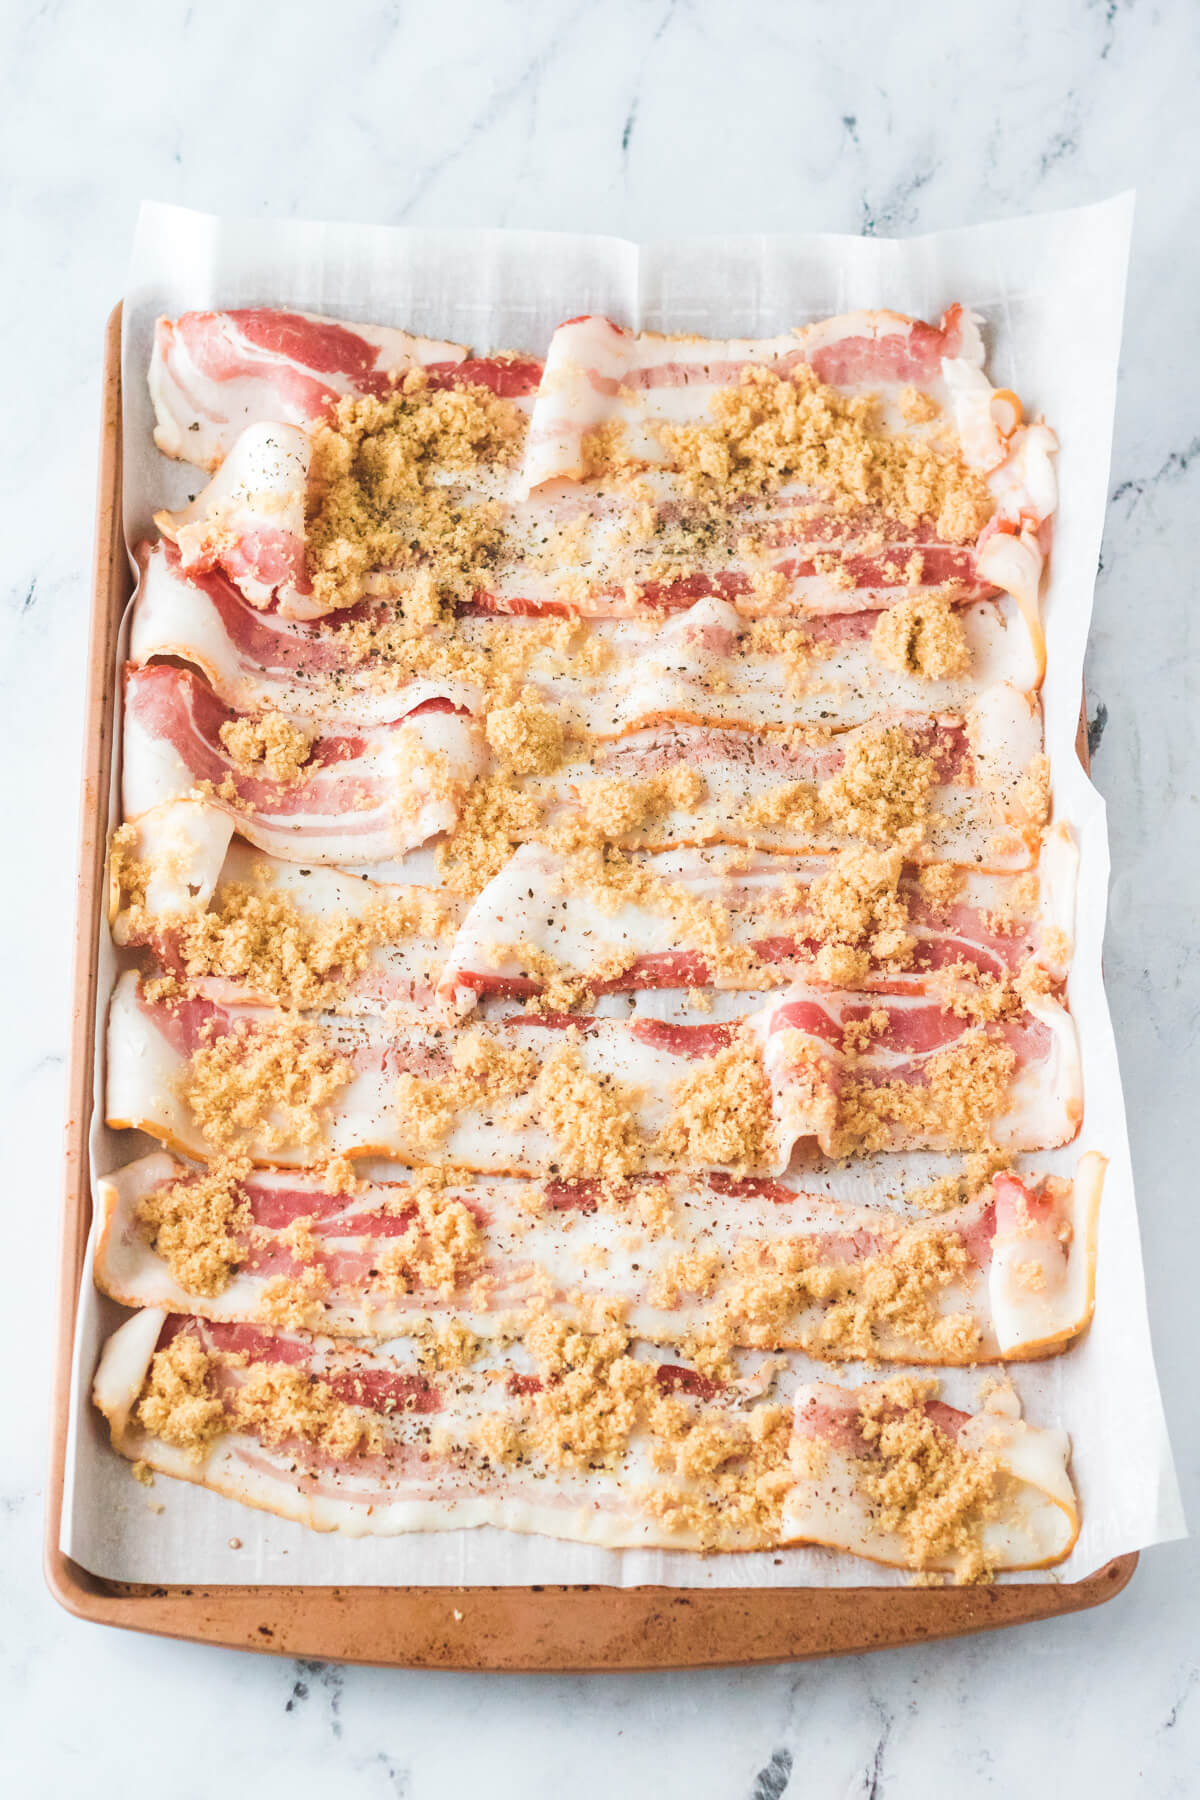 Strips of bacon covered in brown sugar on a baking sheet.